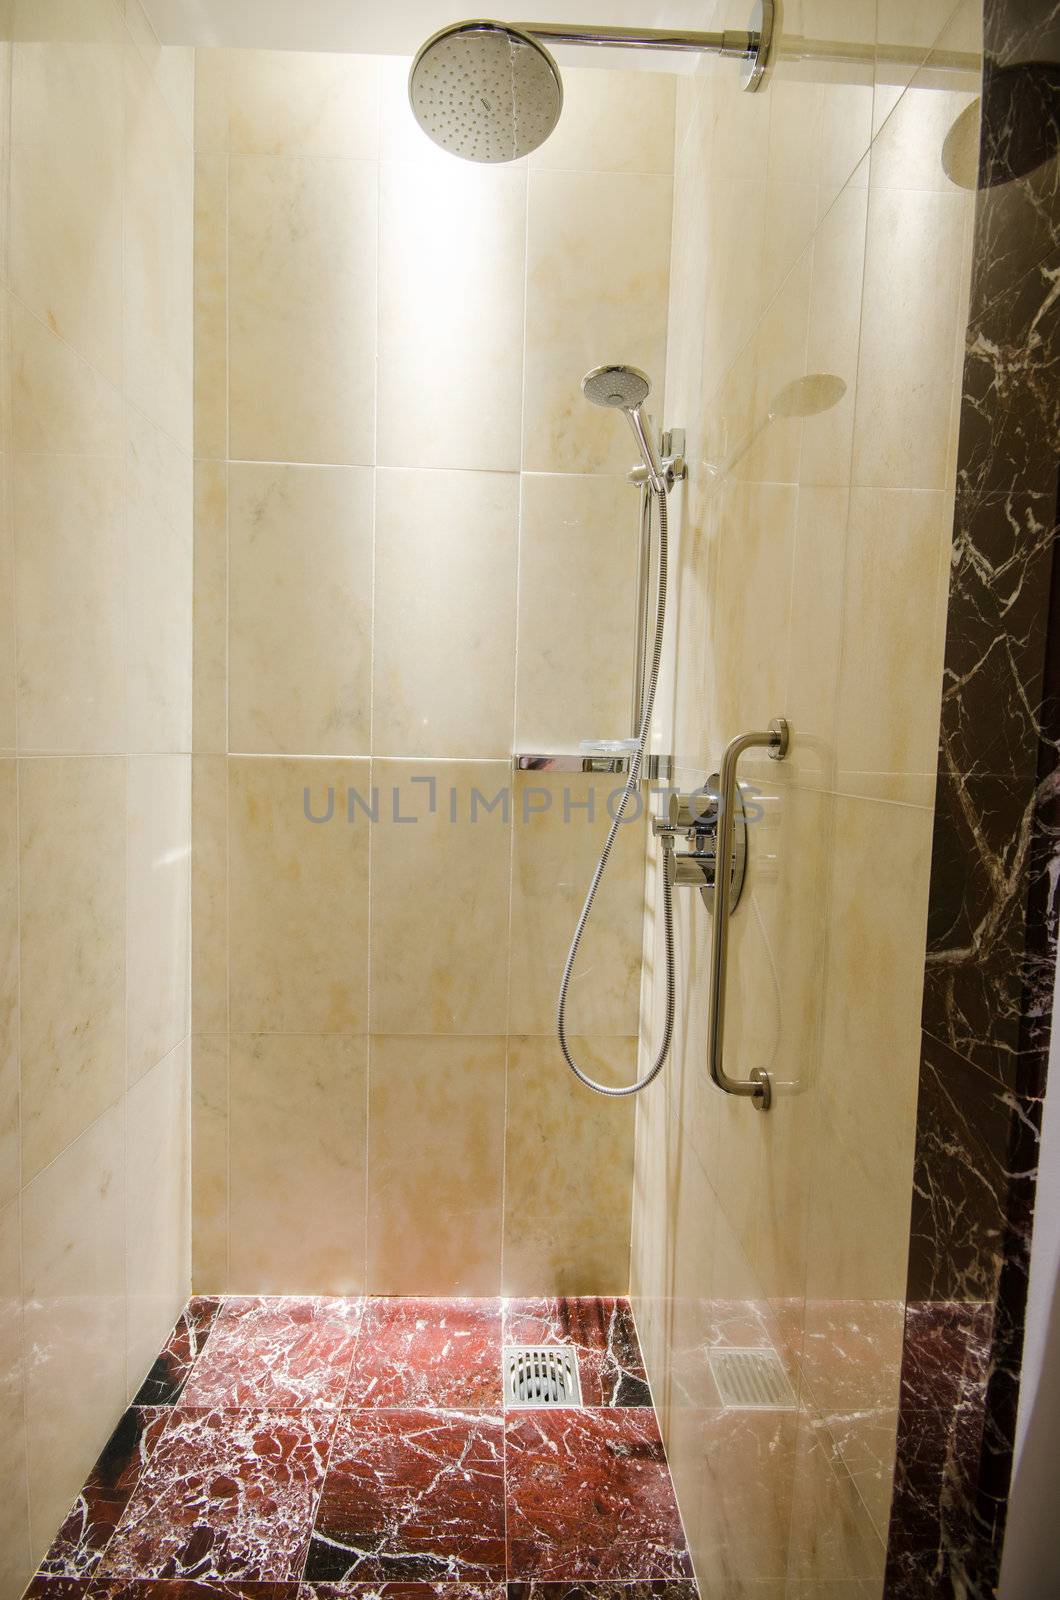 Interior of bathroom with shower